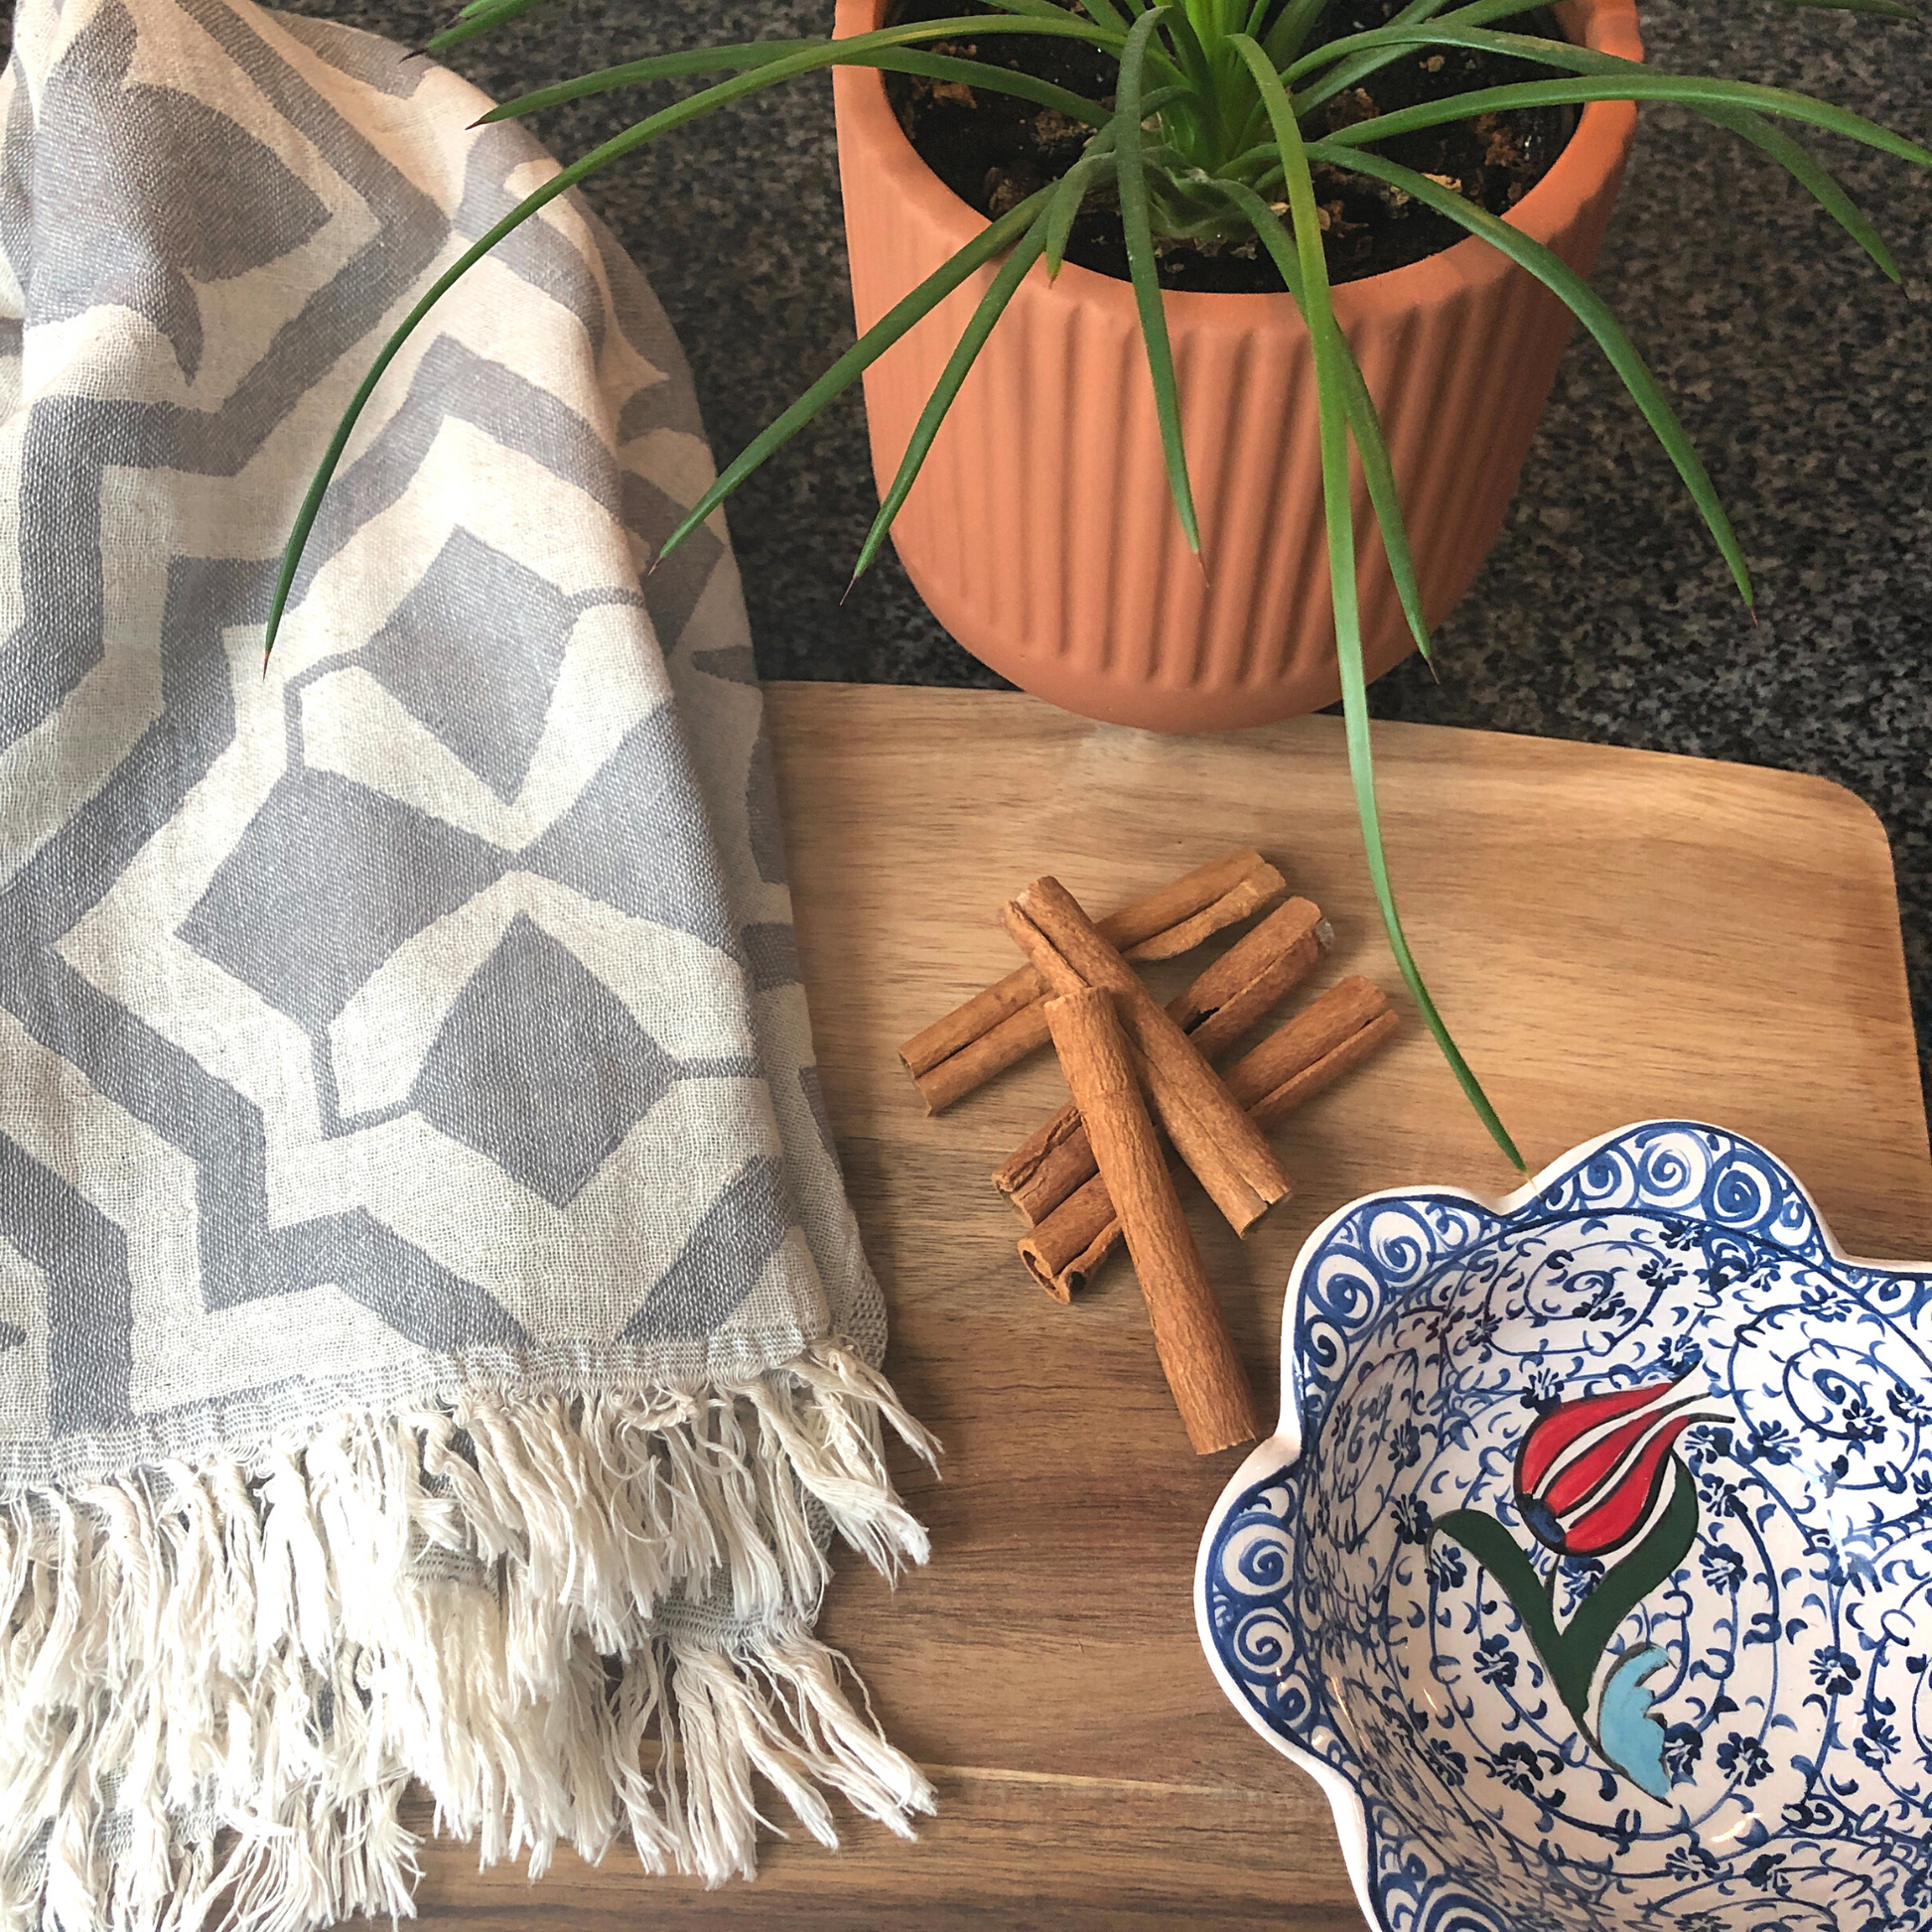 TULIP Turkish Kitchen Towel on kitchen countertop with cinnamon sticks, red-tulip snack bowl and plant